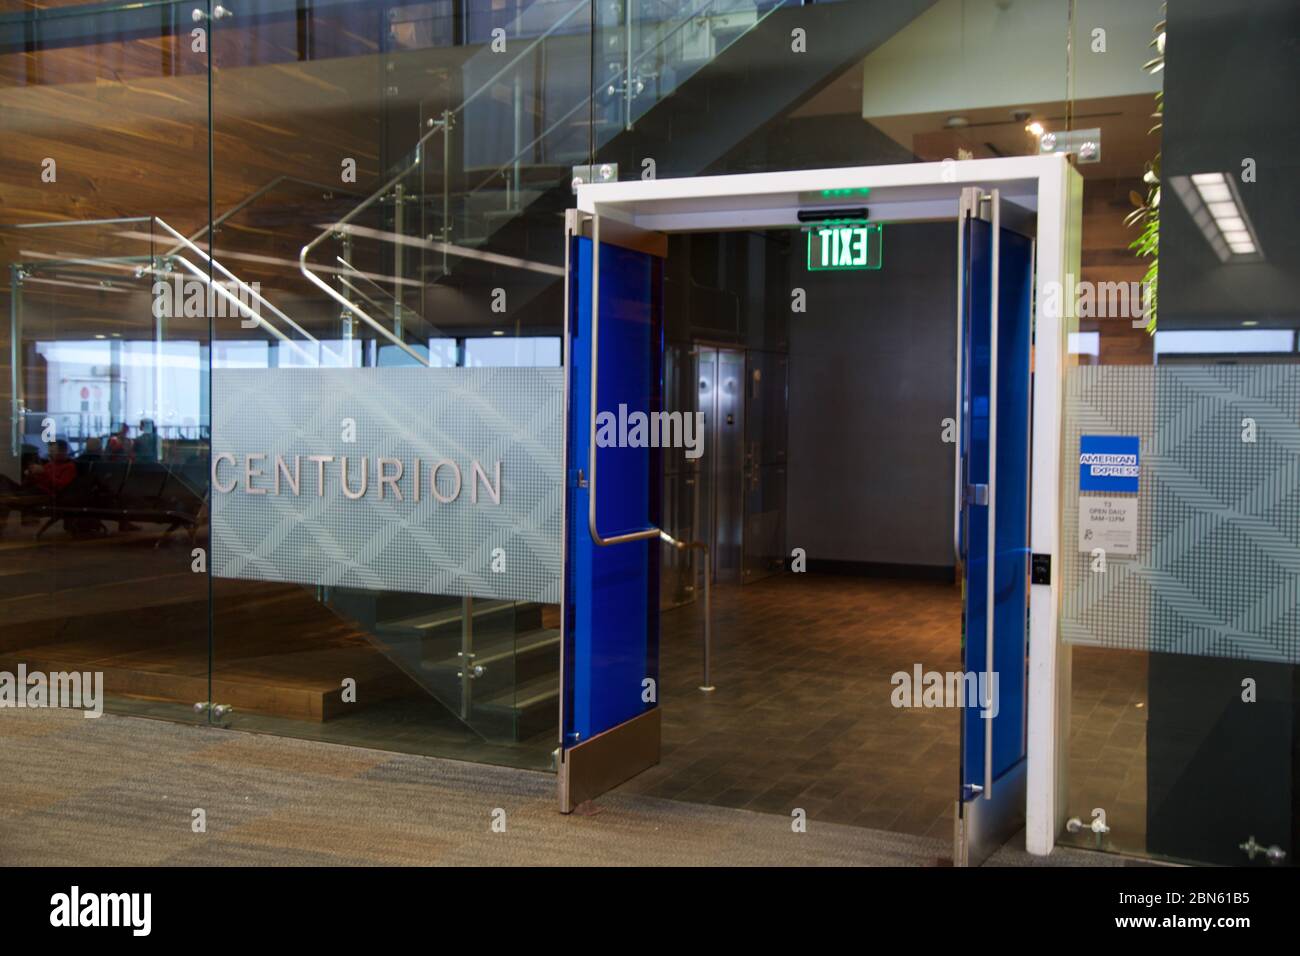 SAN FRANCISCO, CALIFORNIA, UNITED STATES - NOV 27th, 2018: Entrance of the American Express Centurion Lounge at the San Francisco Airport SFO Stock Photo